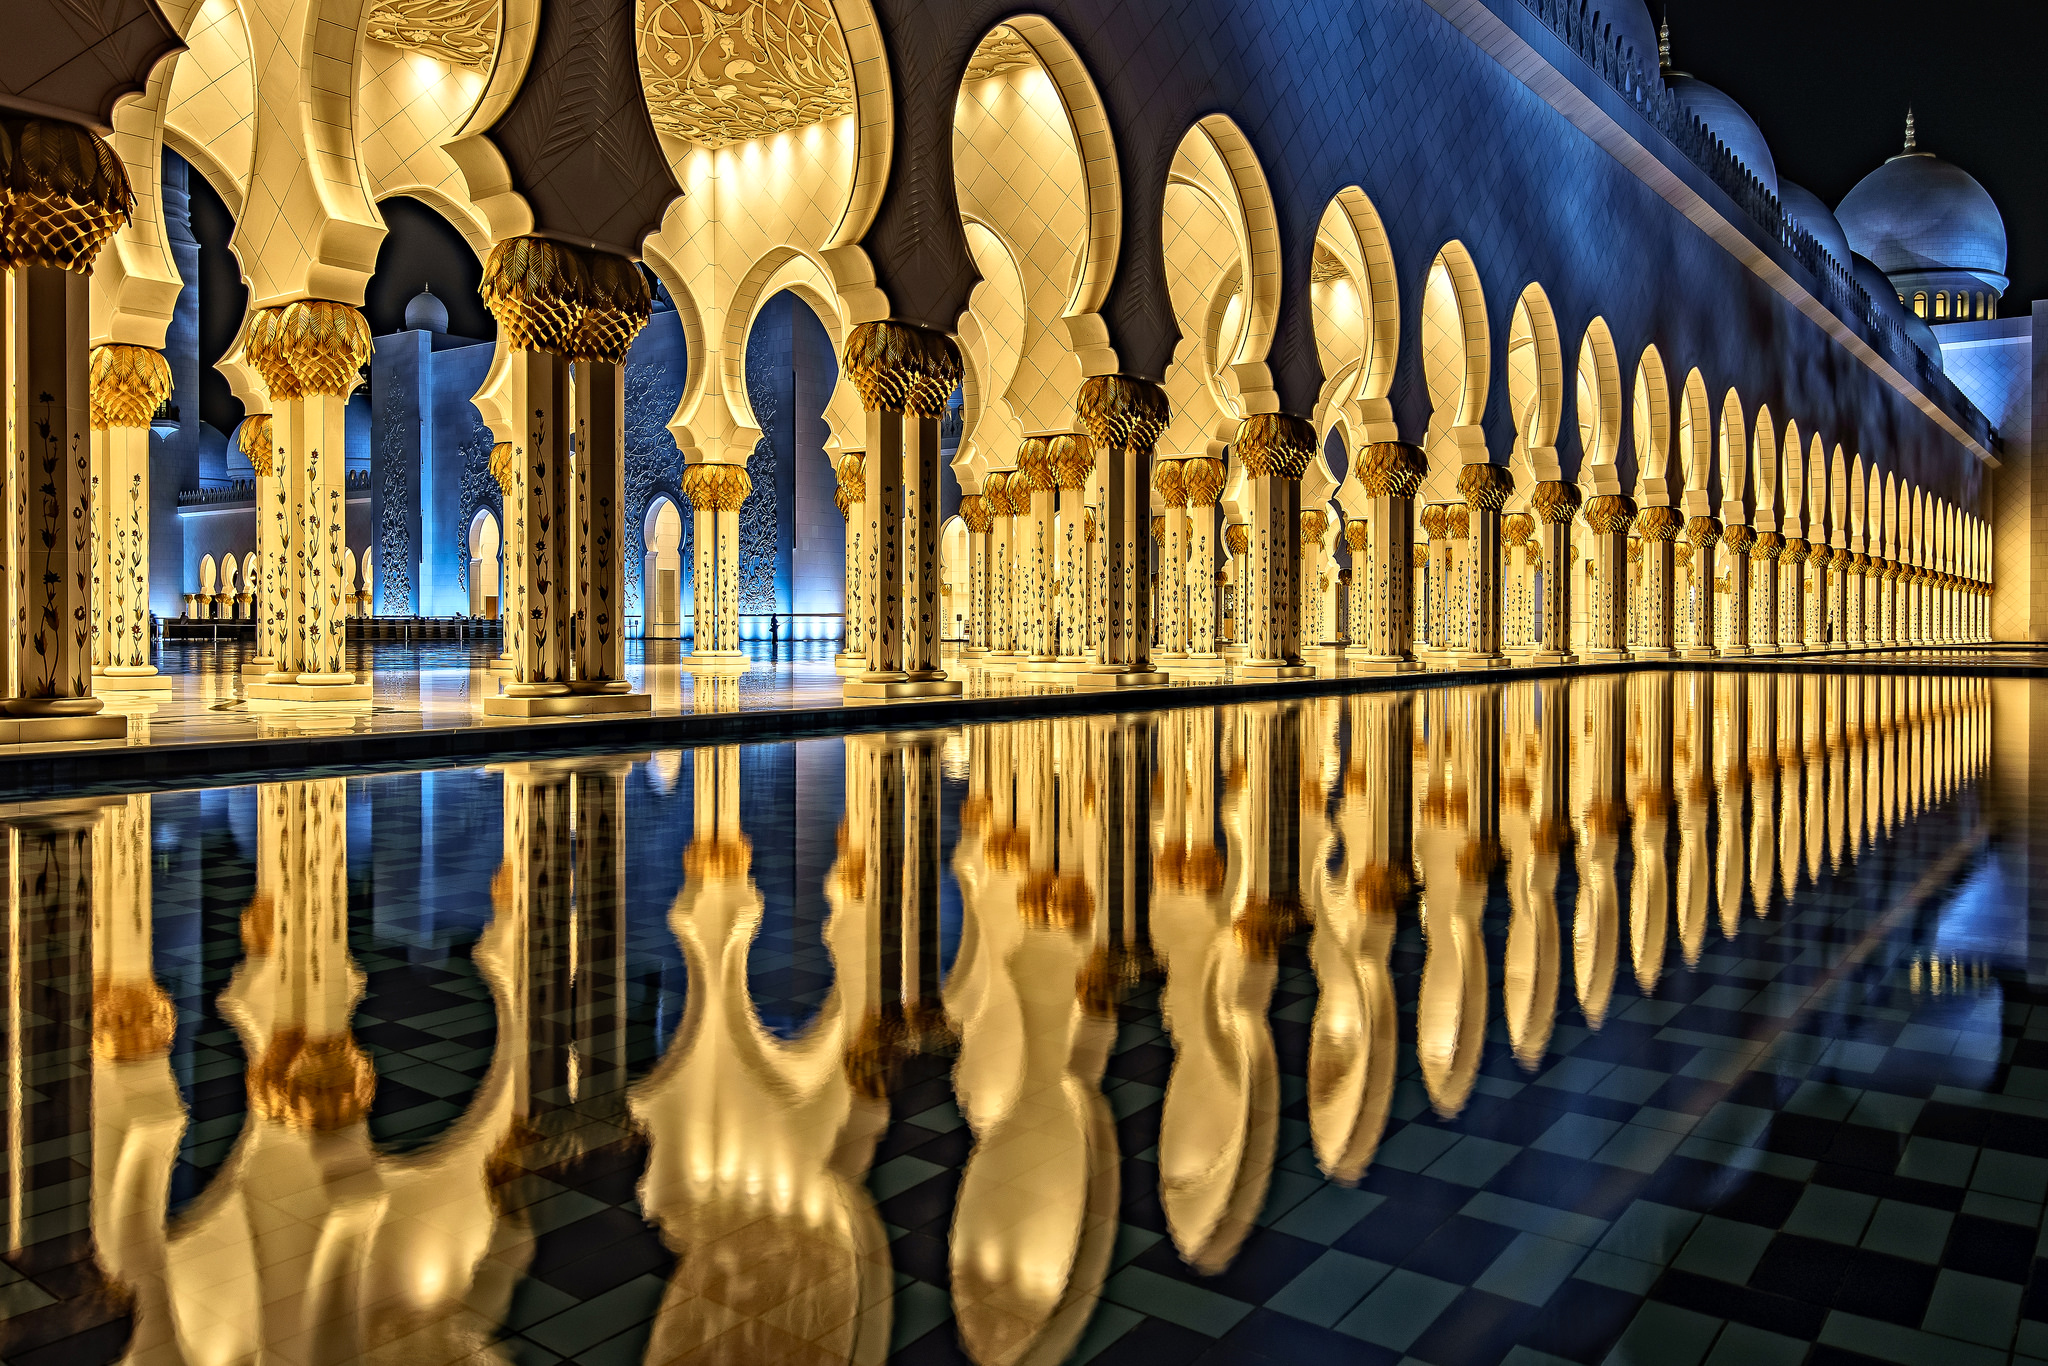 abu dhabi, mosque, sheikh zayed grand mosque, religious, architecture, light, night, reflection, mosques